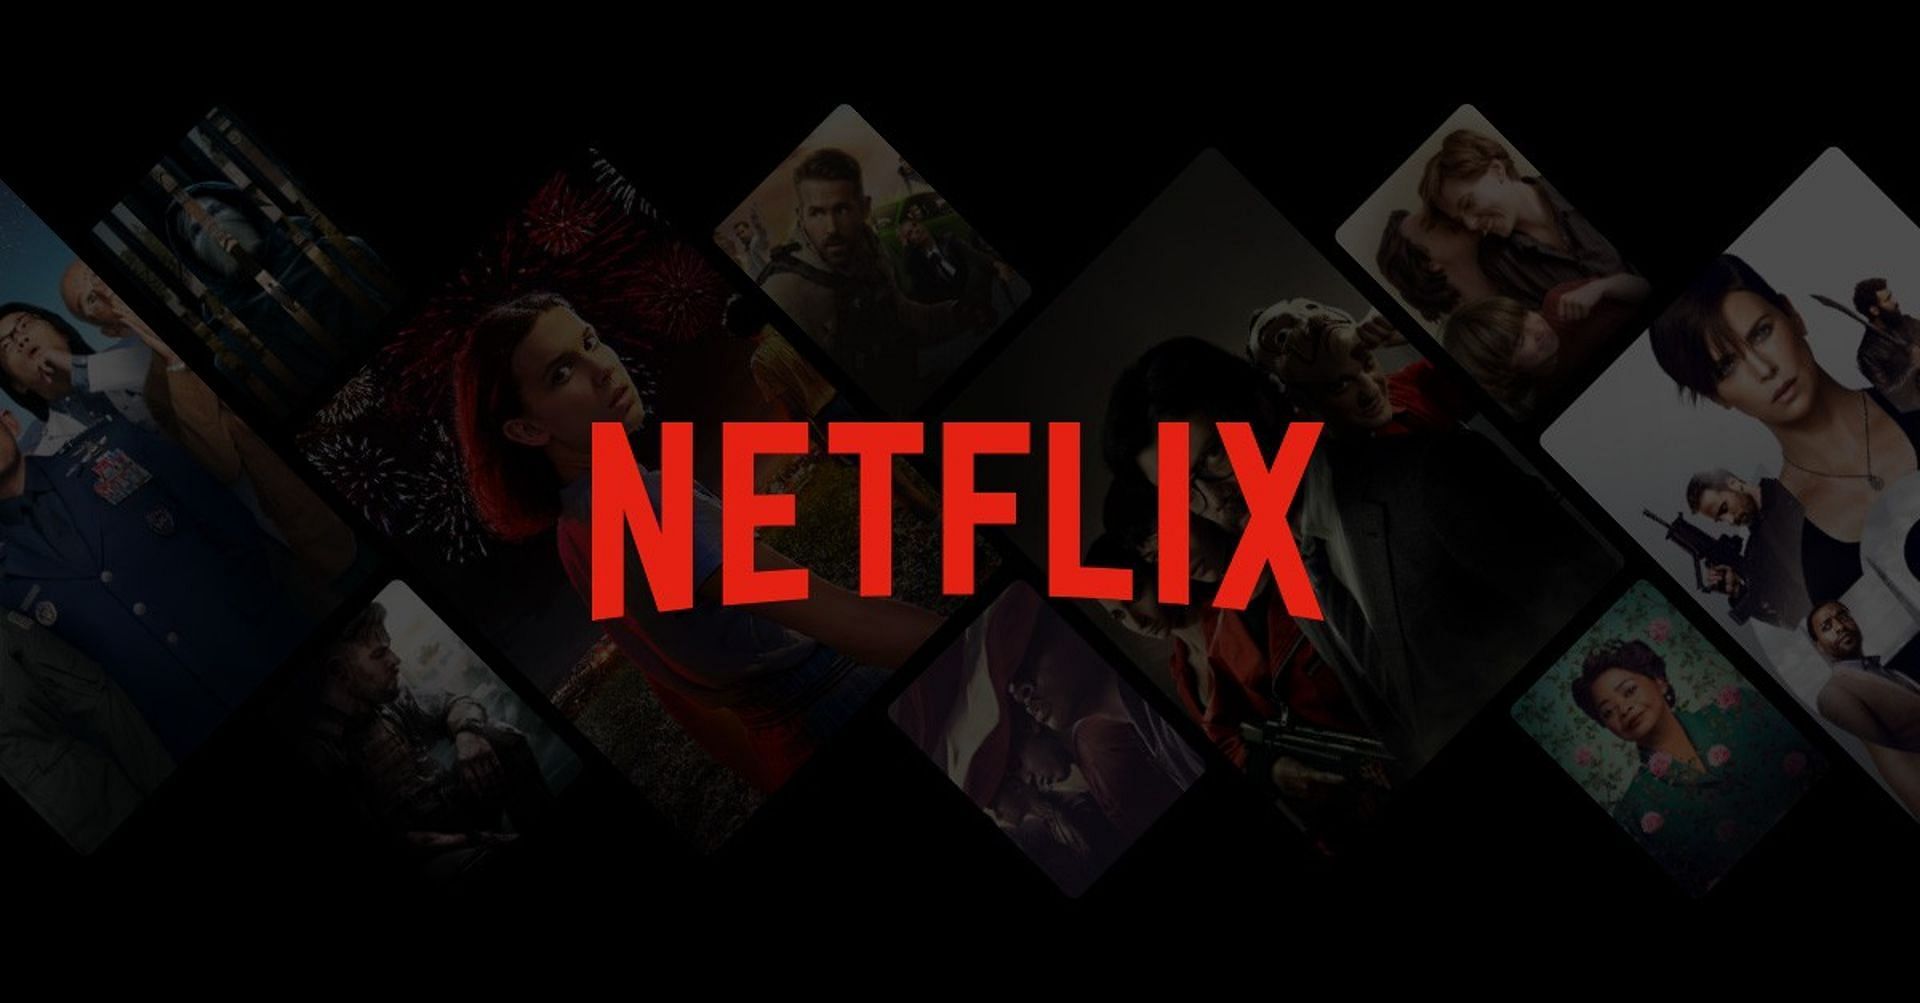 A range of tv shows can be binged on Netflix currently. (Image via Netflix)